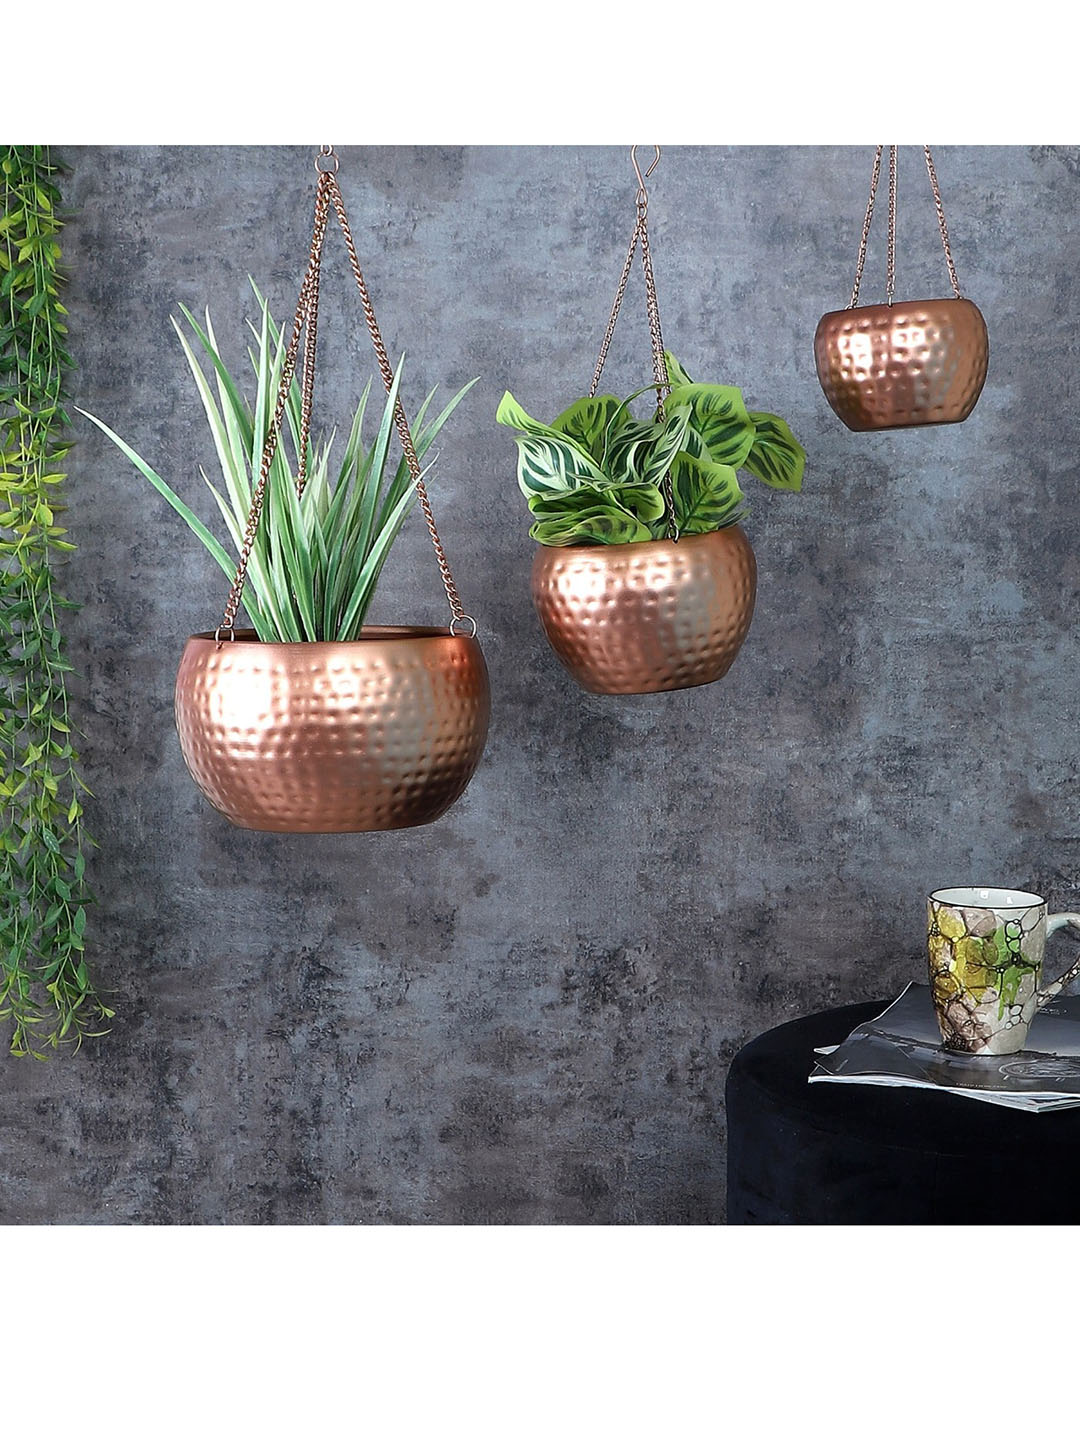 Amaya Decors Set Of 3 Copper-Toned Hammered Apple Metal Hanging Planters Price in India